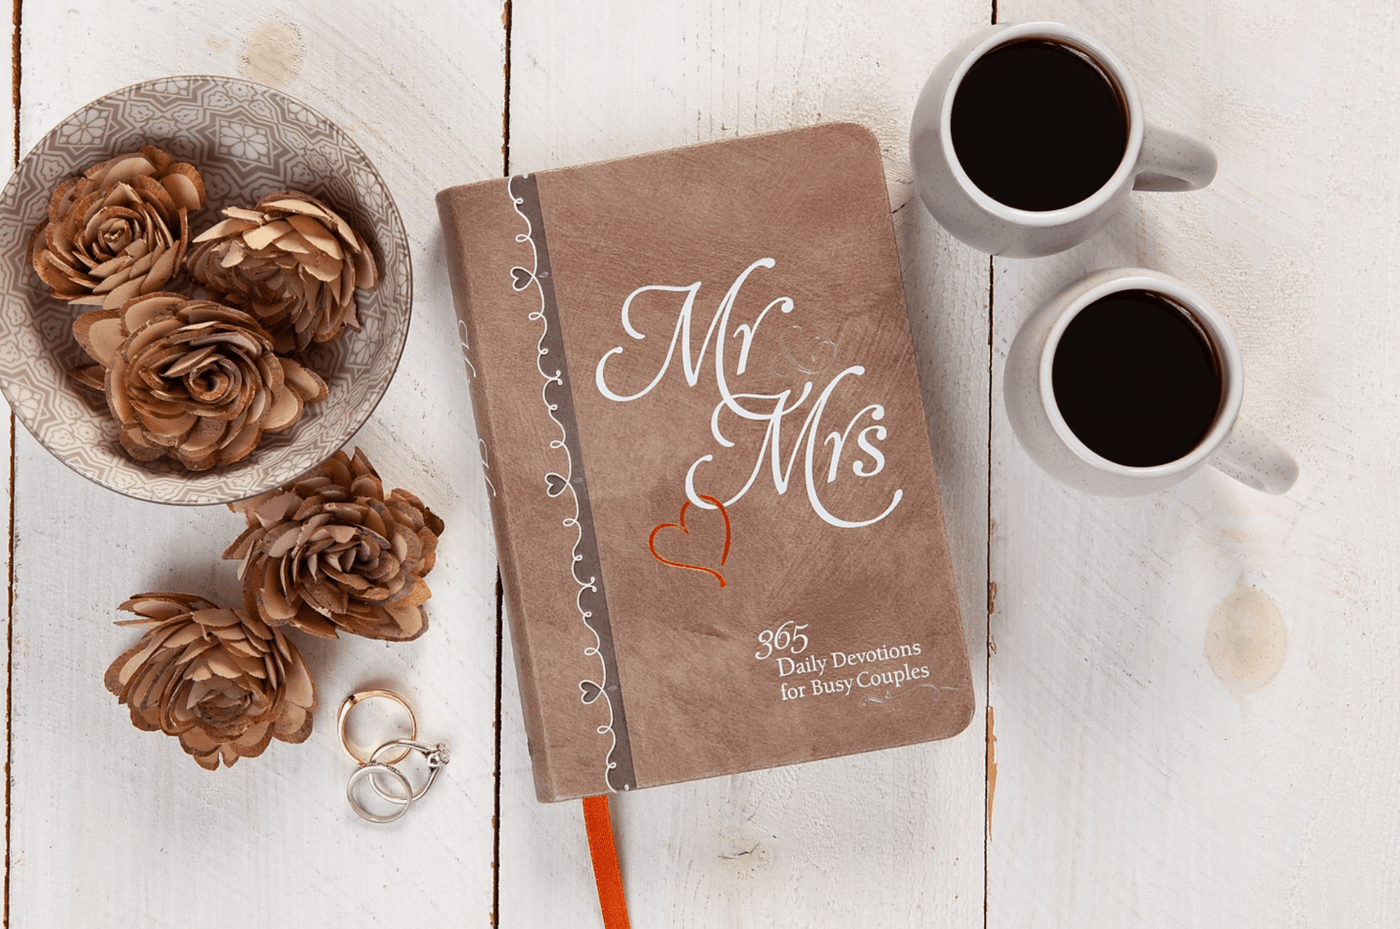 Mr & Mrs Couples Devotional , BOOK , It's NOMB , 365 DAY COUPLES PRAYER JOURNAL, COUPLE GIFT, COUPLES PRAYER BOOK, ENGAGEMENT GIFT, FAITH BASED GIFTS, mr and mrs couples devotional, STOCKING STUFFER, stocking stuffers, WEDDING GIFT , It's NOMB , itsnomb.com